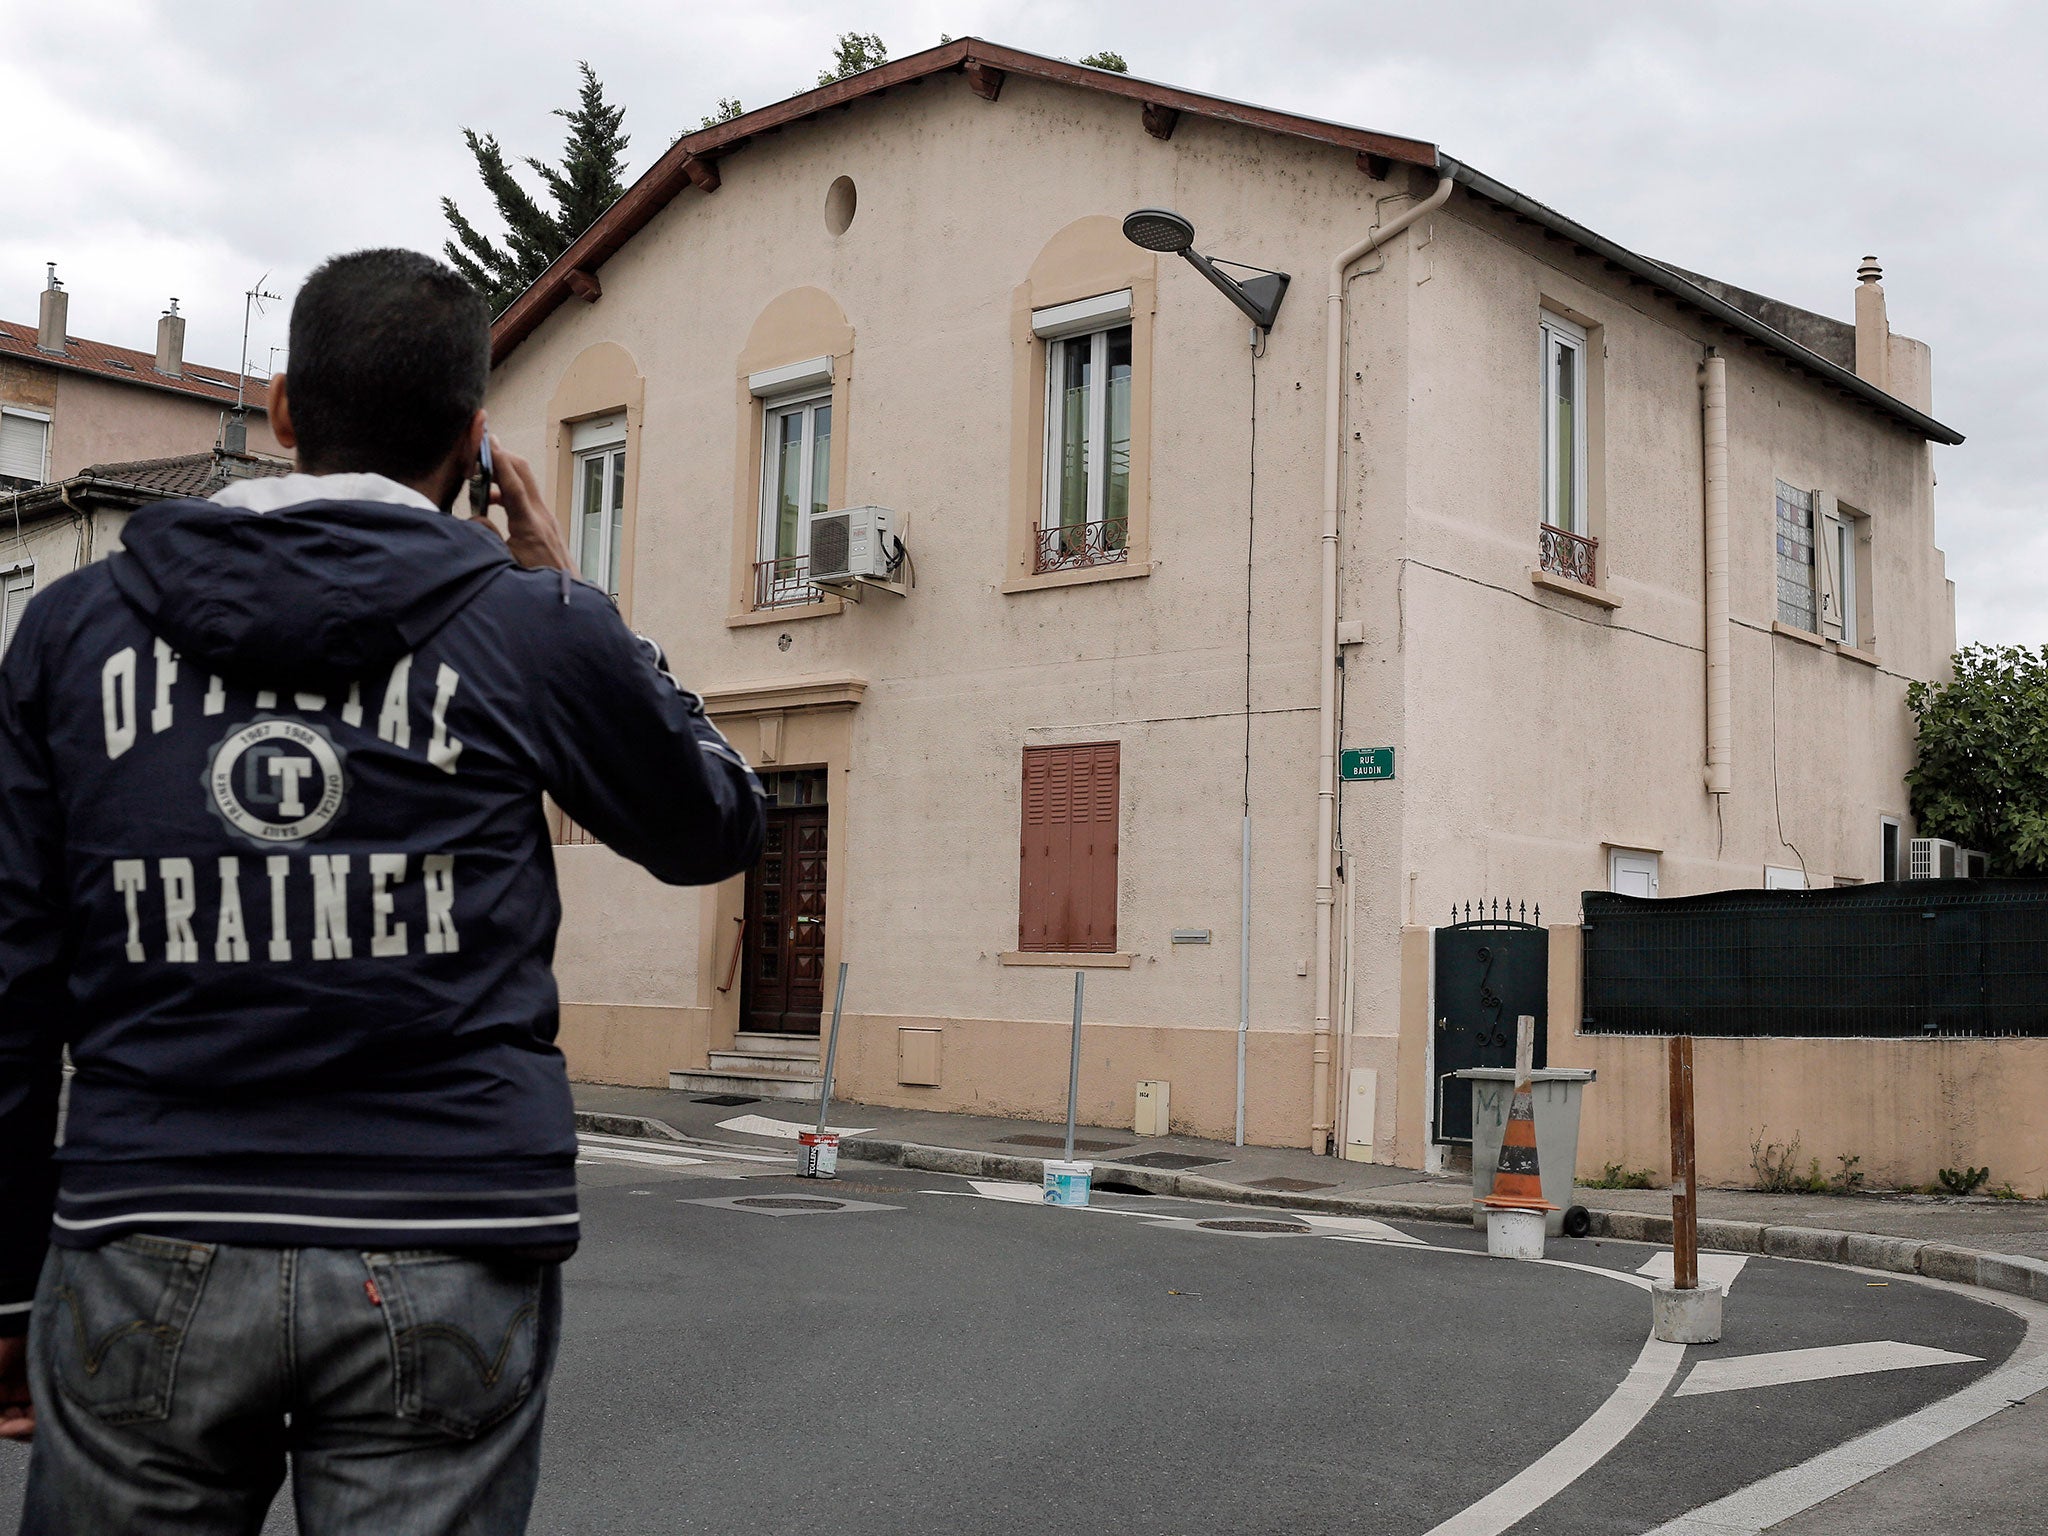 The small Oullins mosque on the edge of Lyon won an unusual court battle against an ultra-conservative Salafist member of the congregation regarded as disruptive and, in an apparent first for Muslims, used France's 1905 law guaranteeing secularism to argu